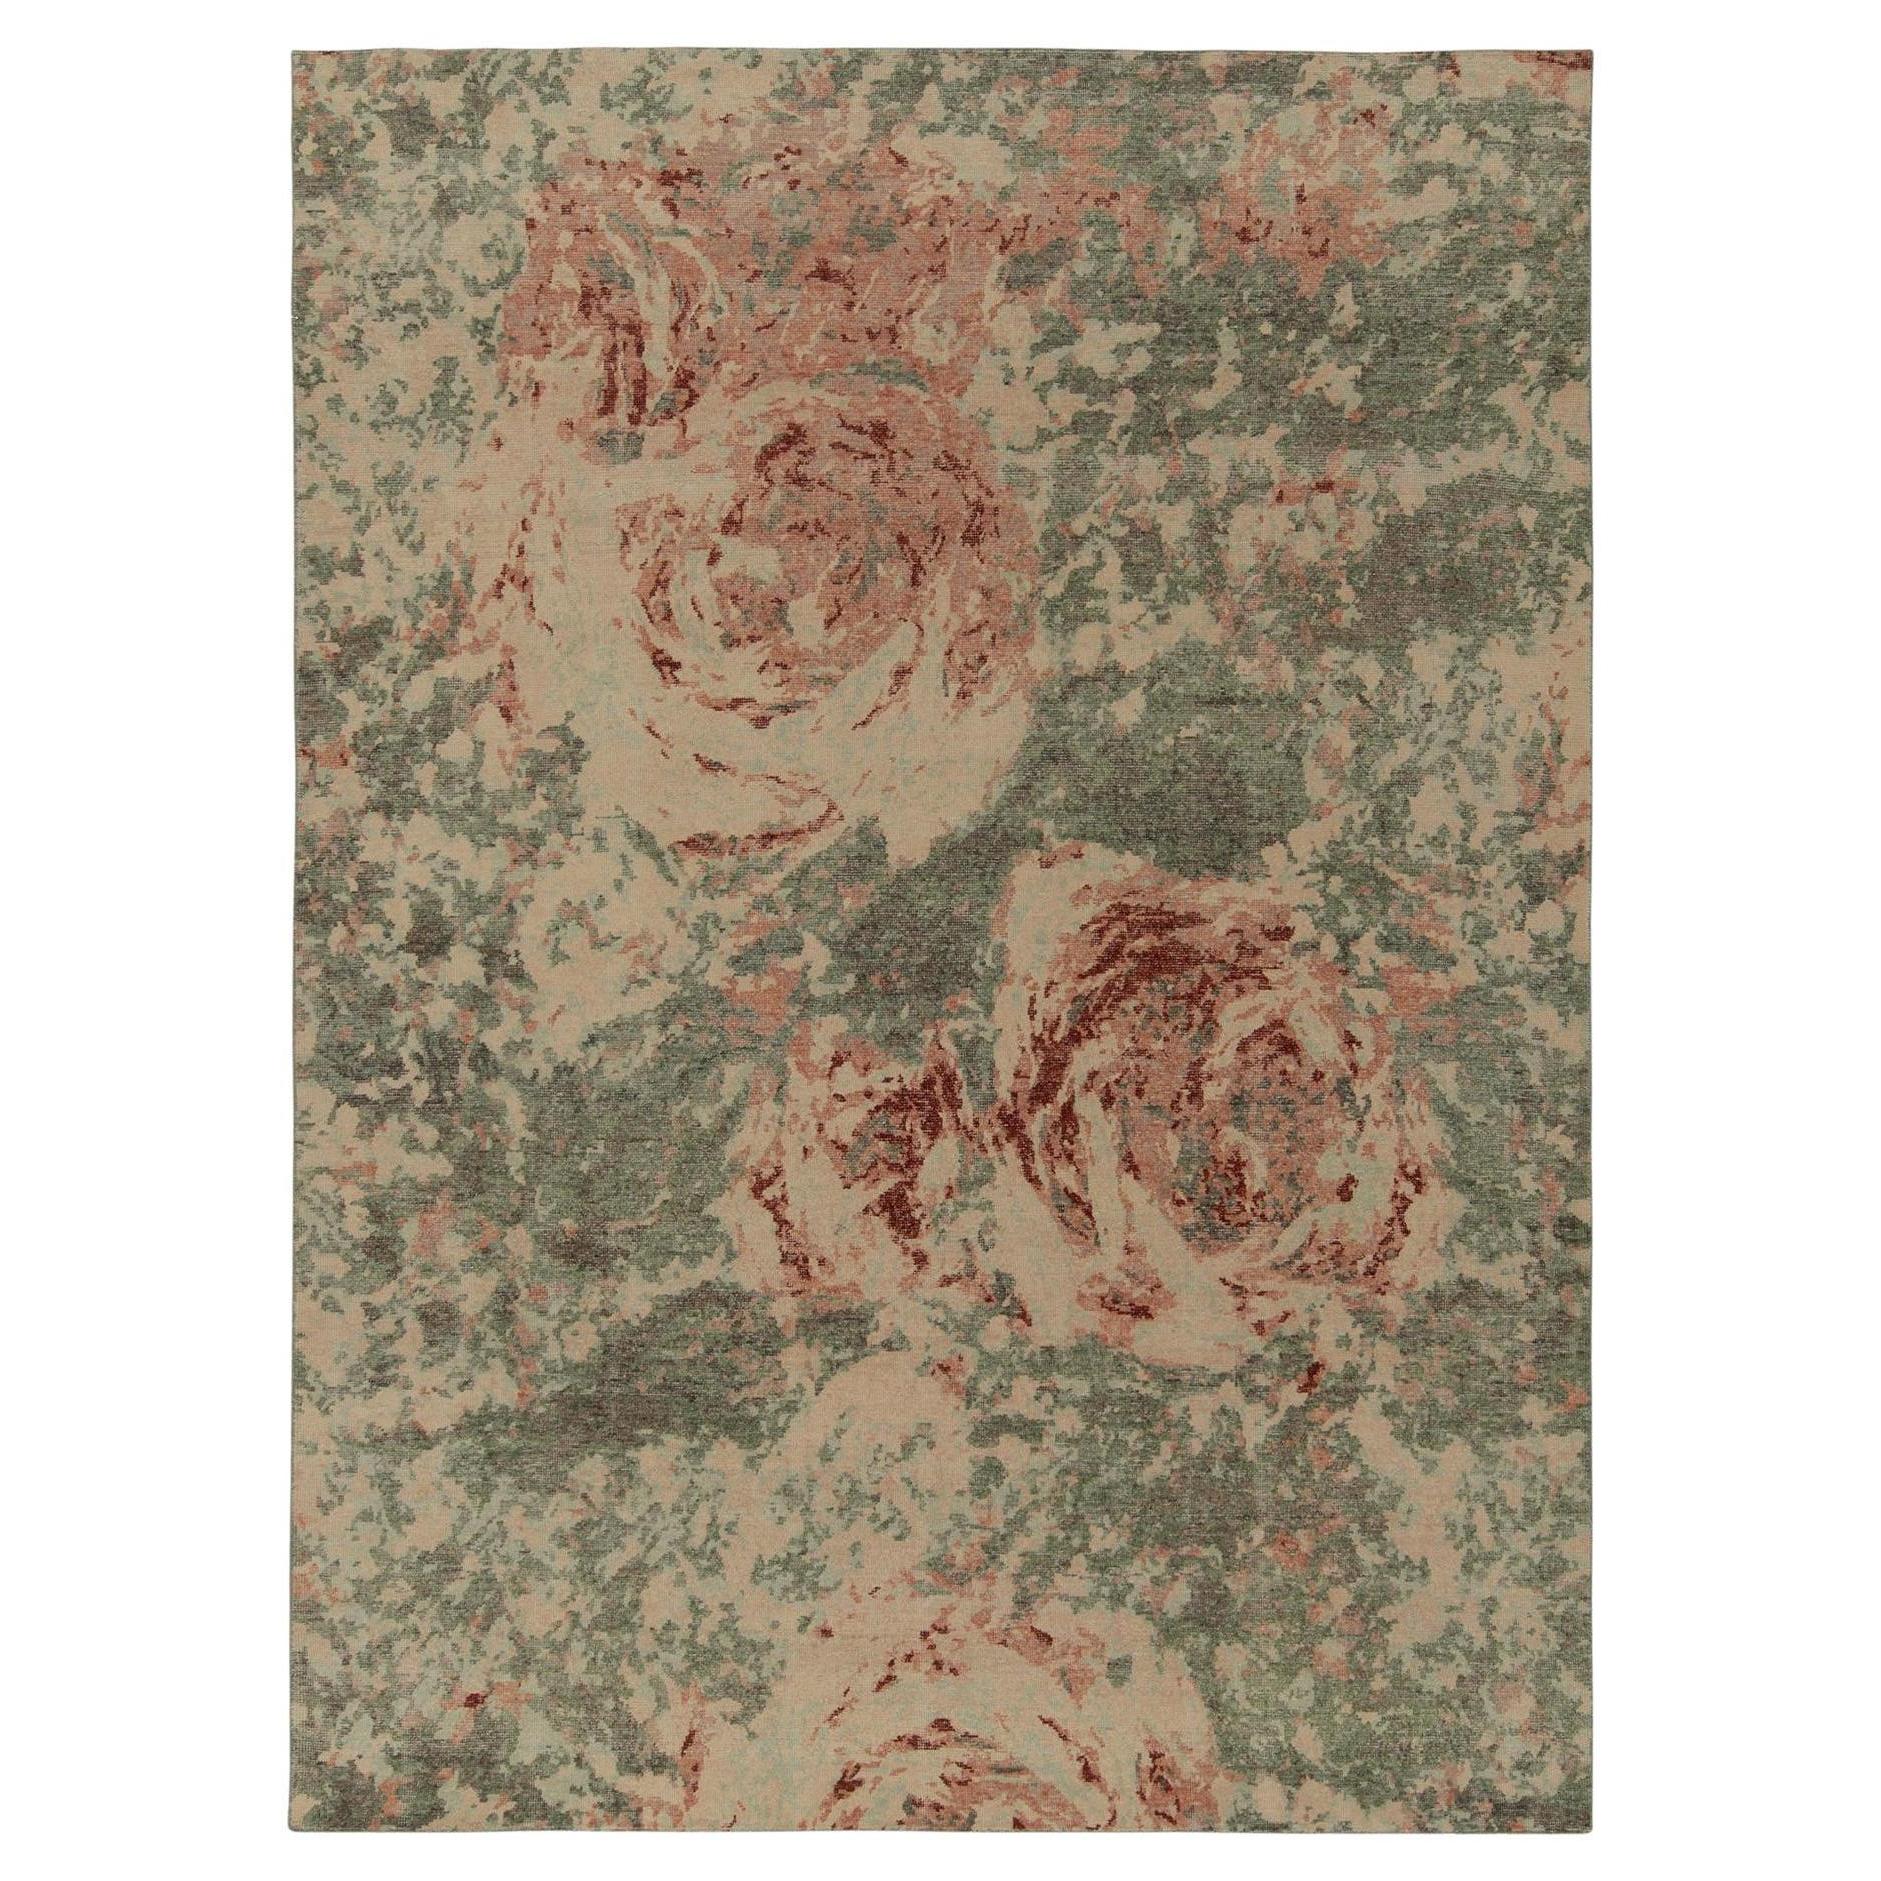 Rug & Kilim’s Distressed Style Rug in Green, Pink Abstract Expressionist Pattern